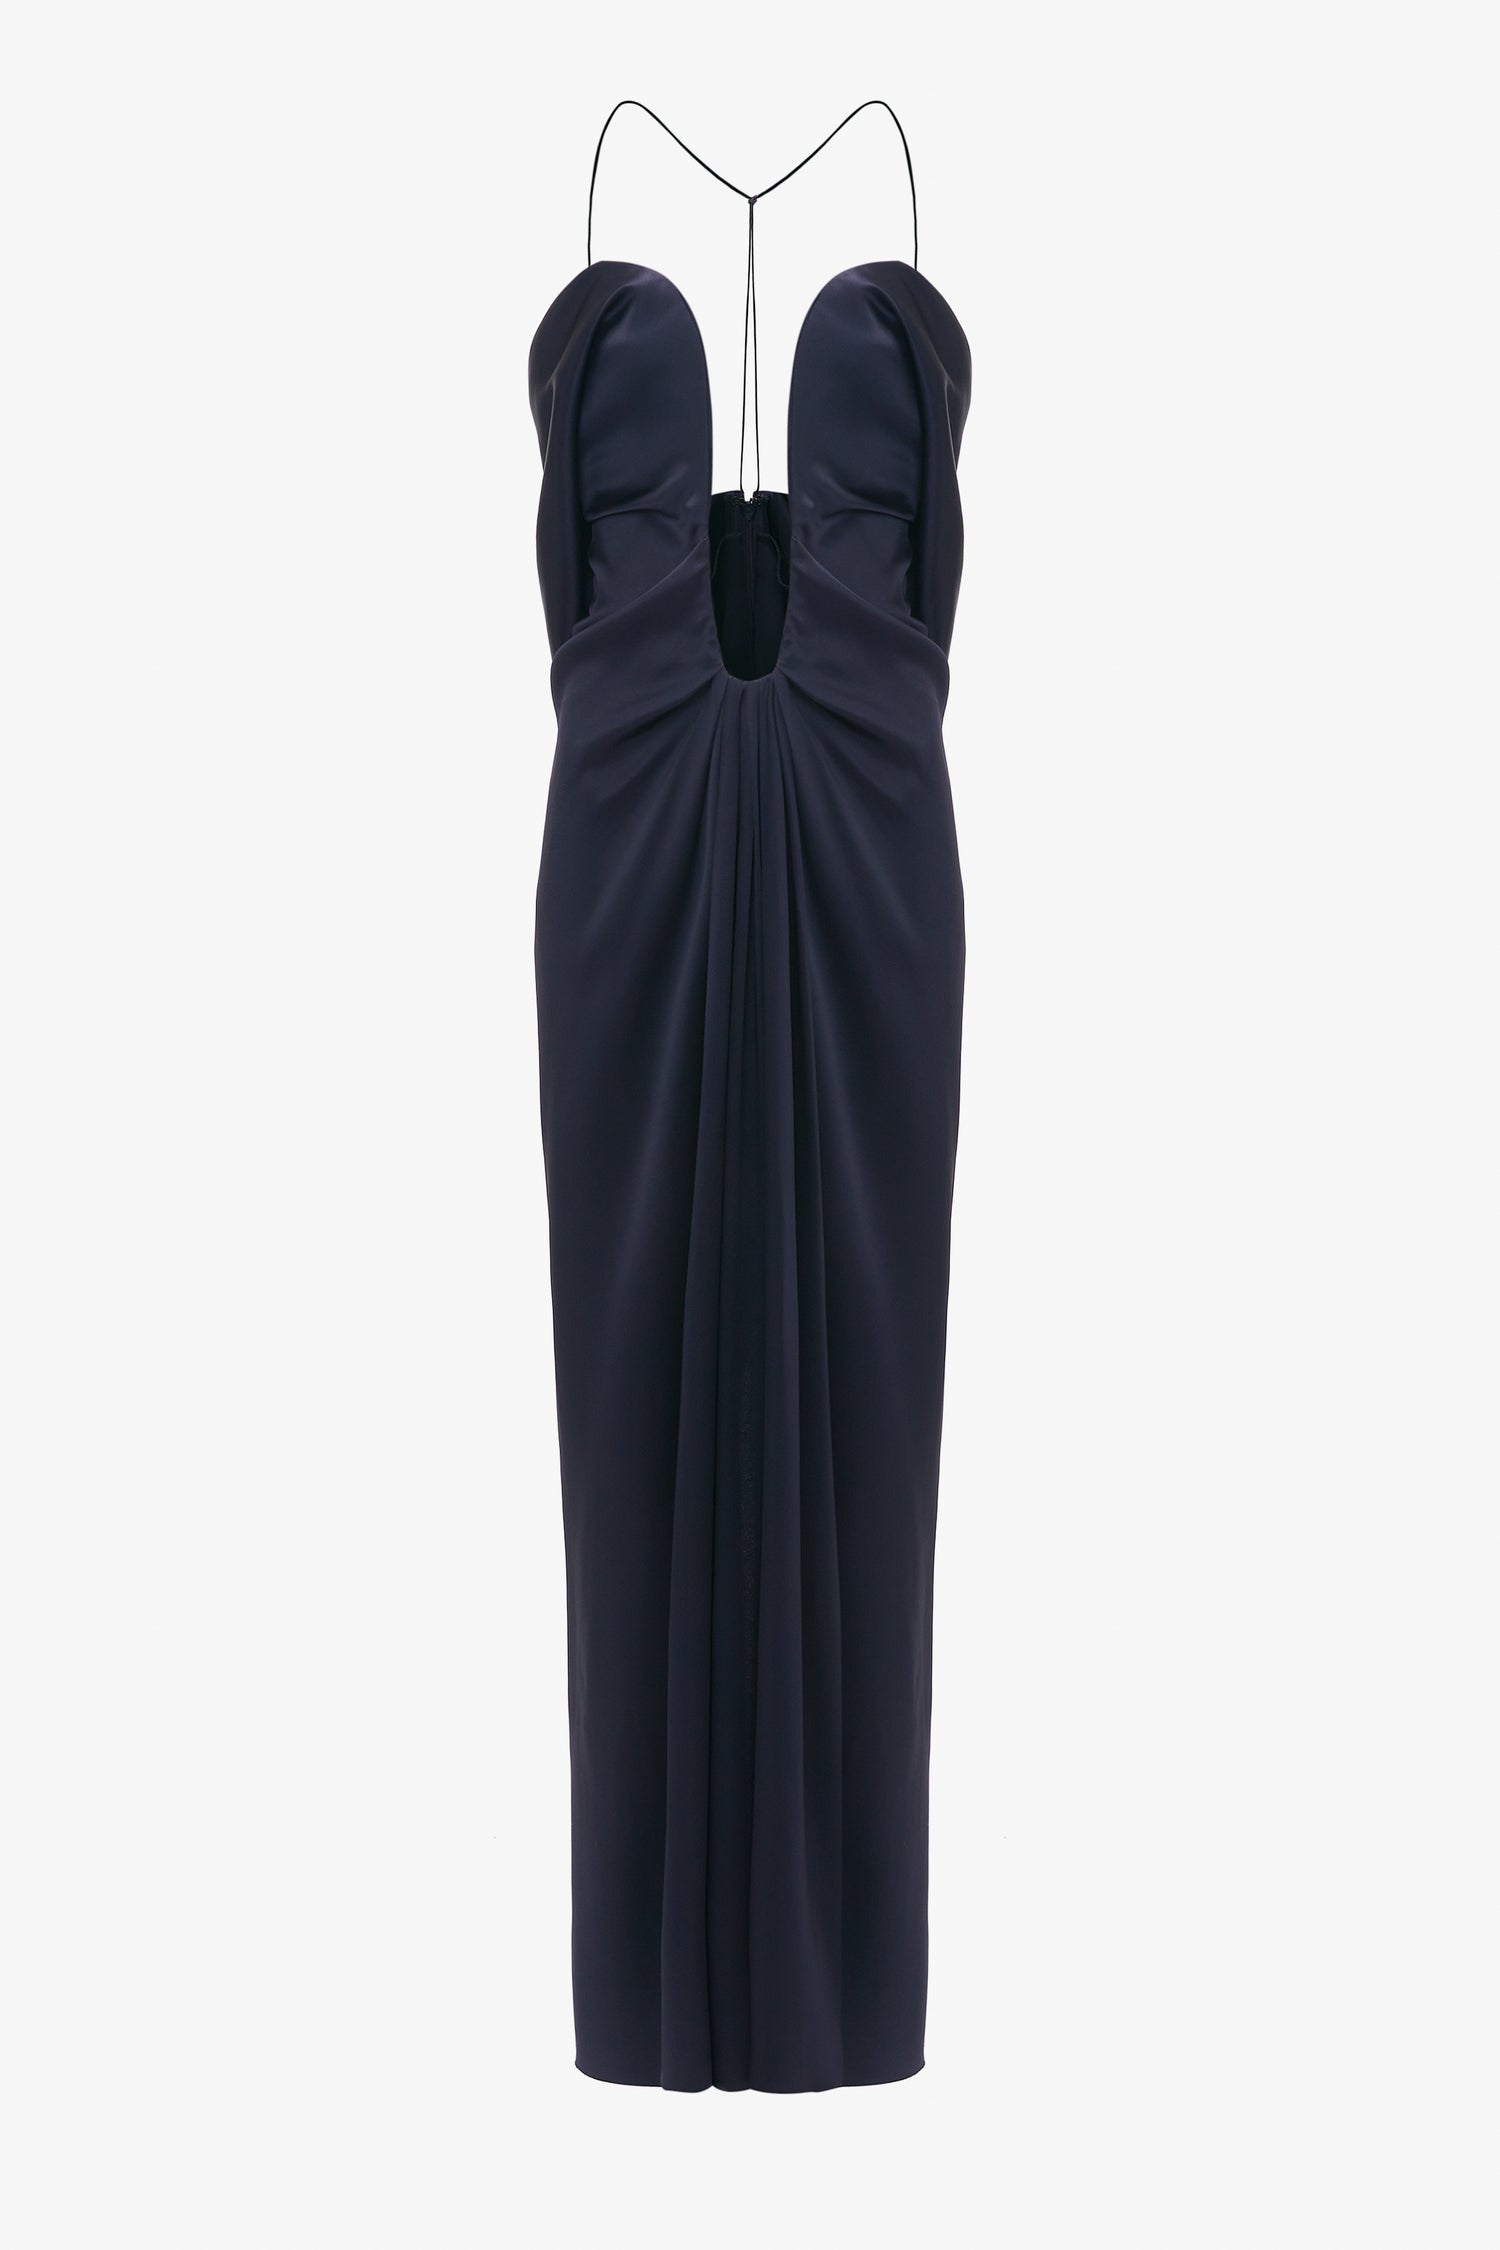 A Victoria Beckham navy blue evening gown with thin straps and a keyhole neckline, crafted from crepe back satin, displayed against a white background.